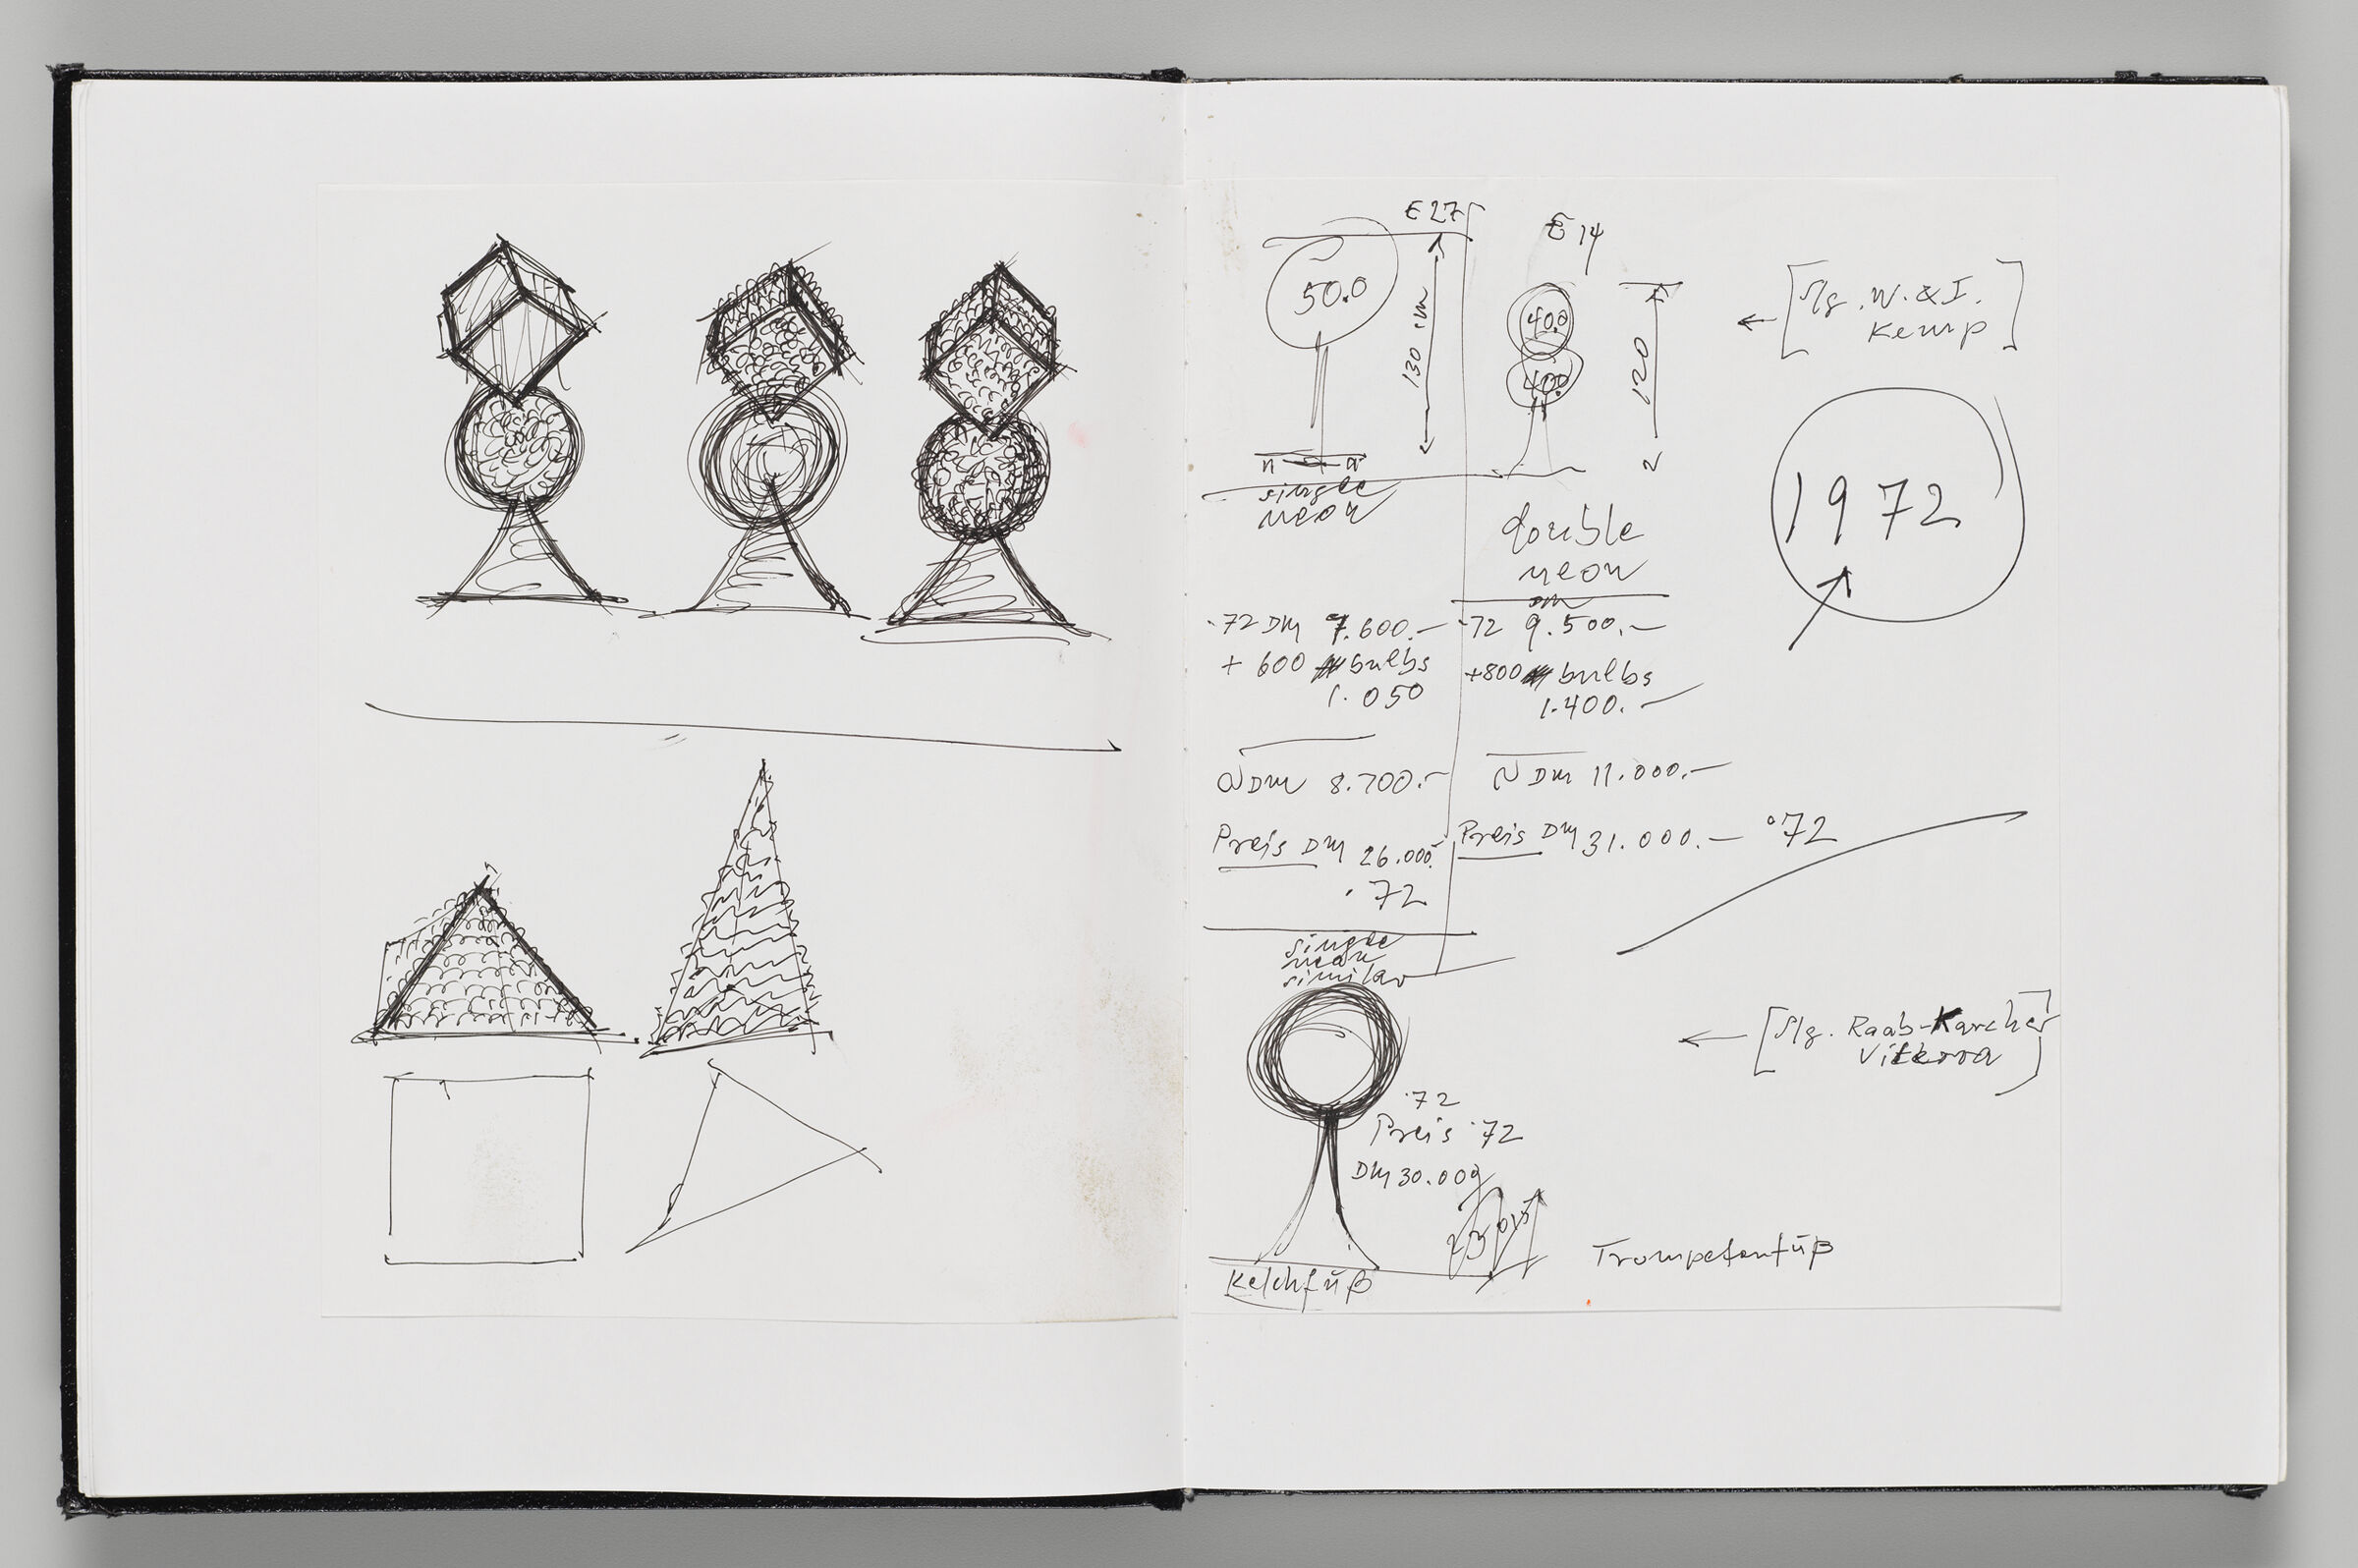 Untitled (Adhered Sketch Of Light Sculptures, Left Page); Untitled (Adhered Notes On Expenses For Light Sculptures, Right Page)